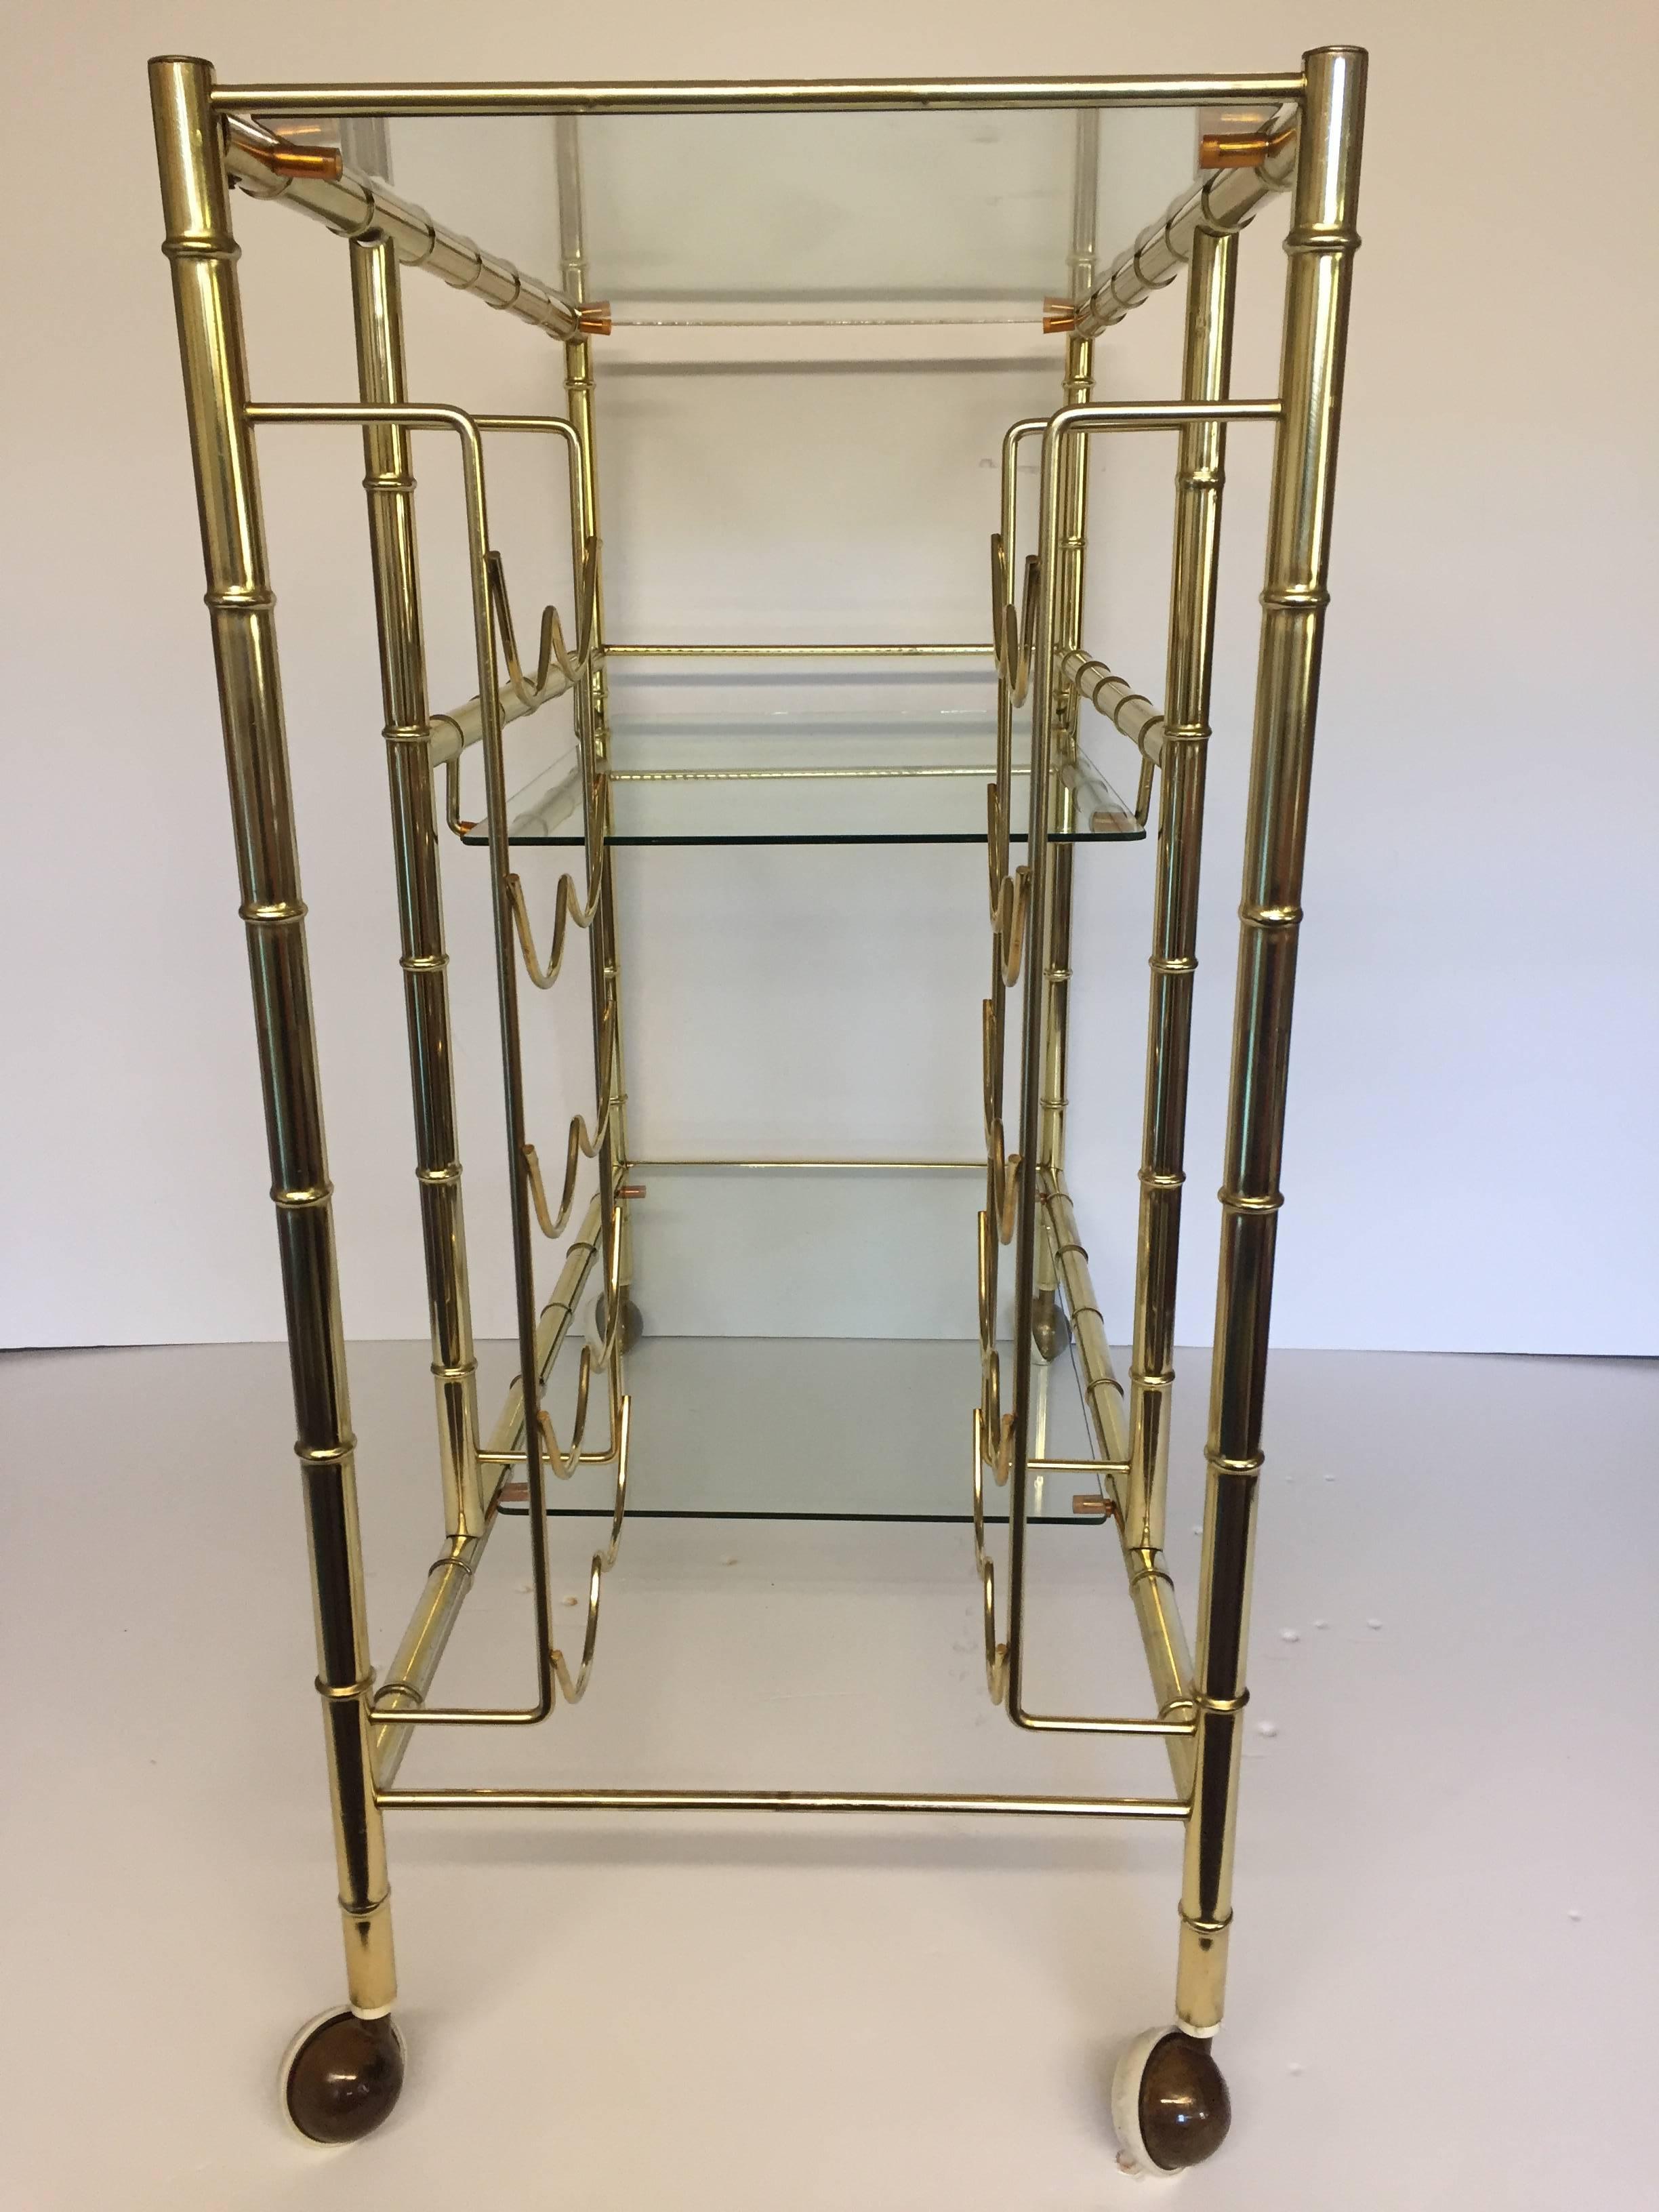 Stylish bar cart with a sophisticated unusual design having a square shape with three glass shelves and a bottle or wine rack to one side. The brass-plated body has a faux bamboo look.
 